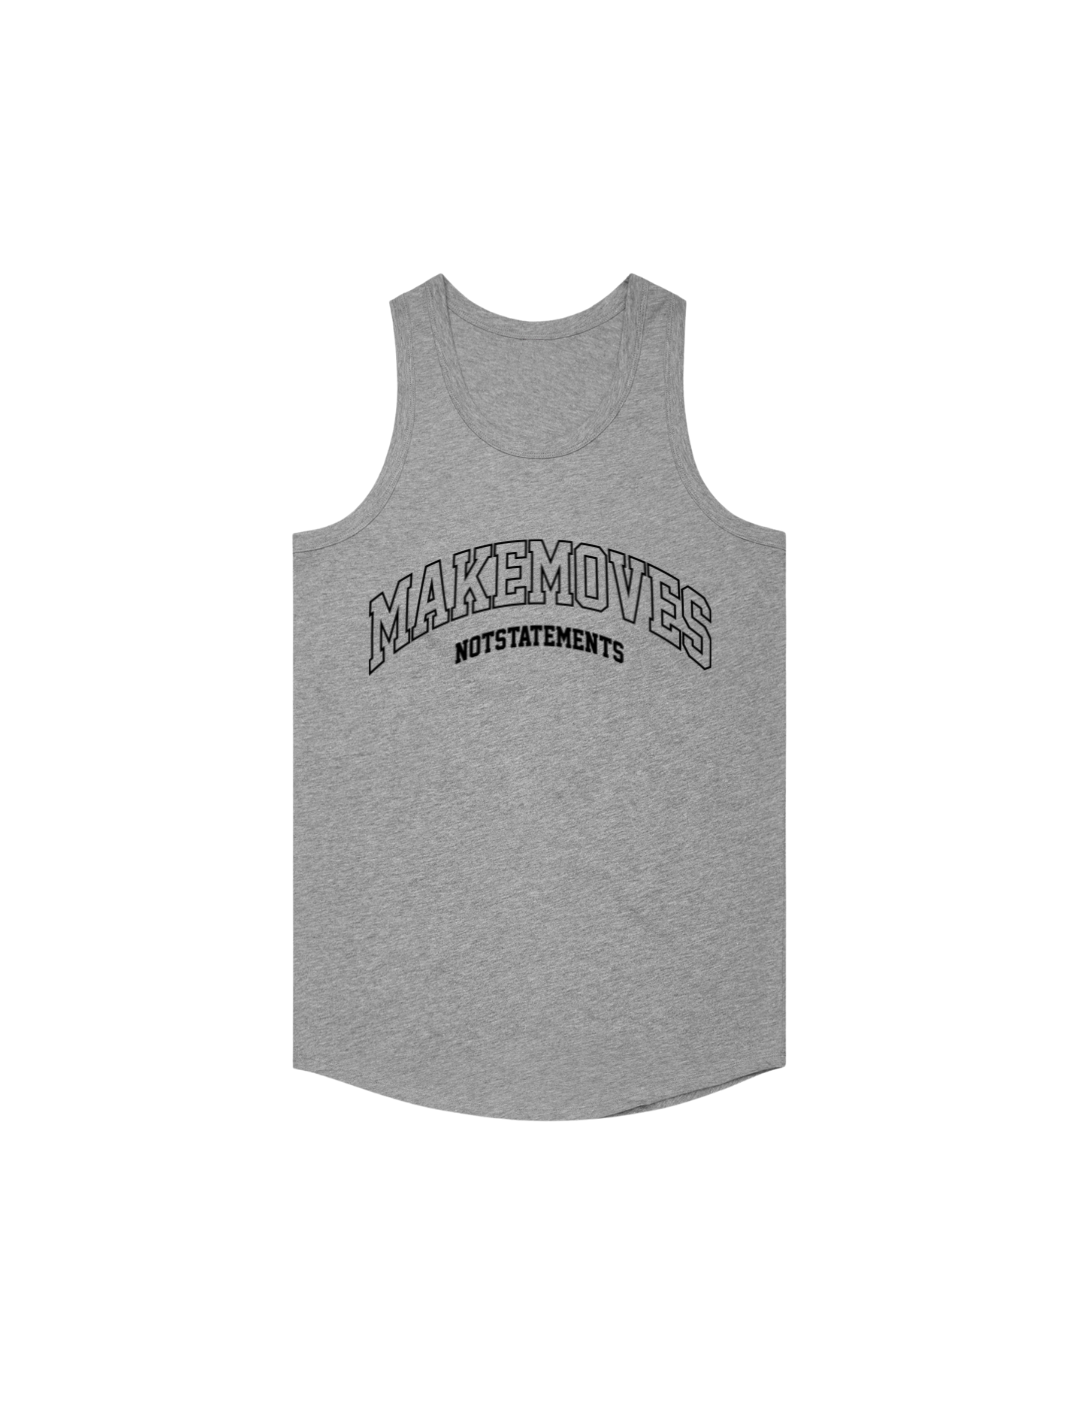 The Make Moves Not Statements Sport Tank is slightly narrow at upper chest, curved hem, double needle bottom hem. The sports tank features a large MMNS logo across the front in black outlined font.